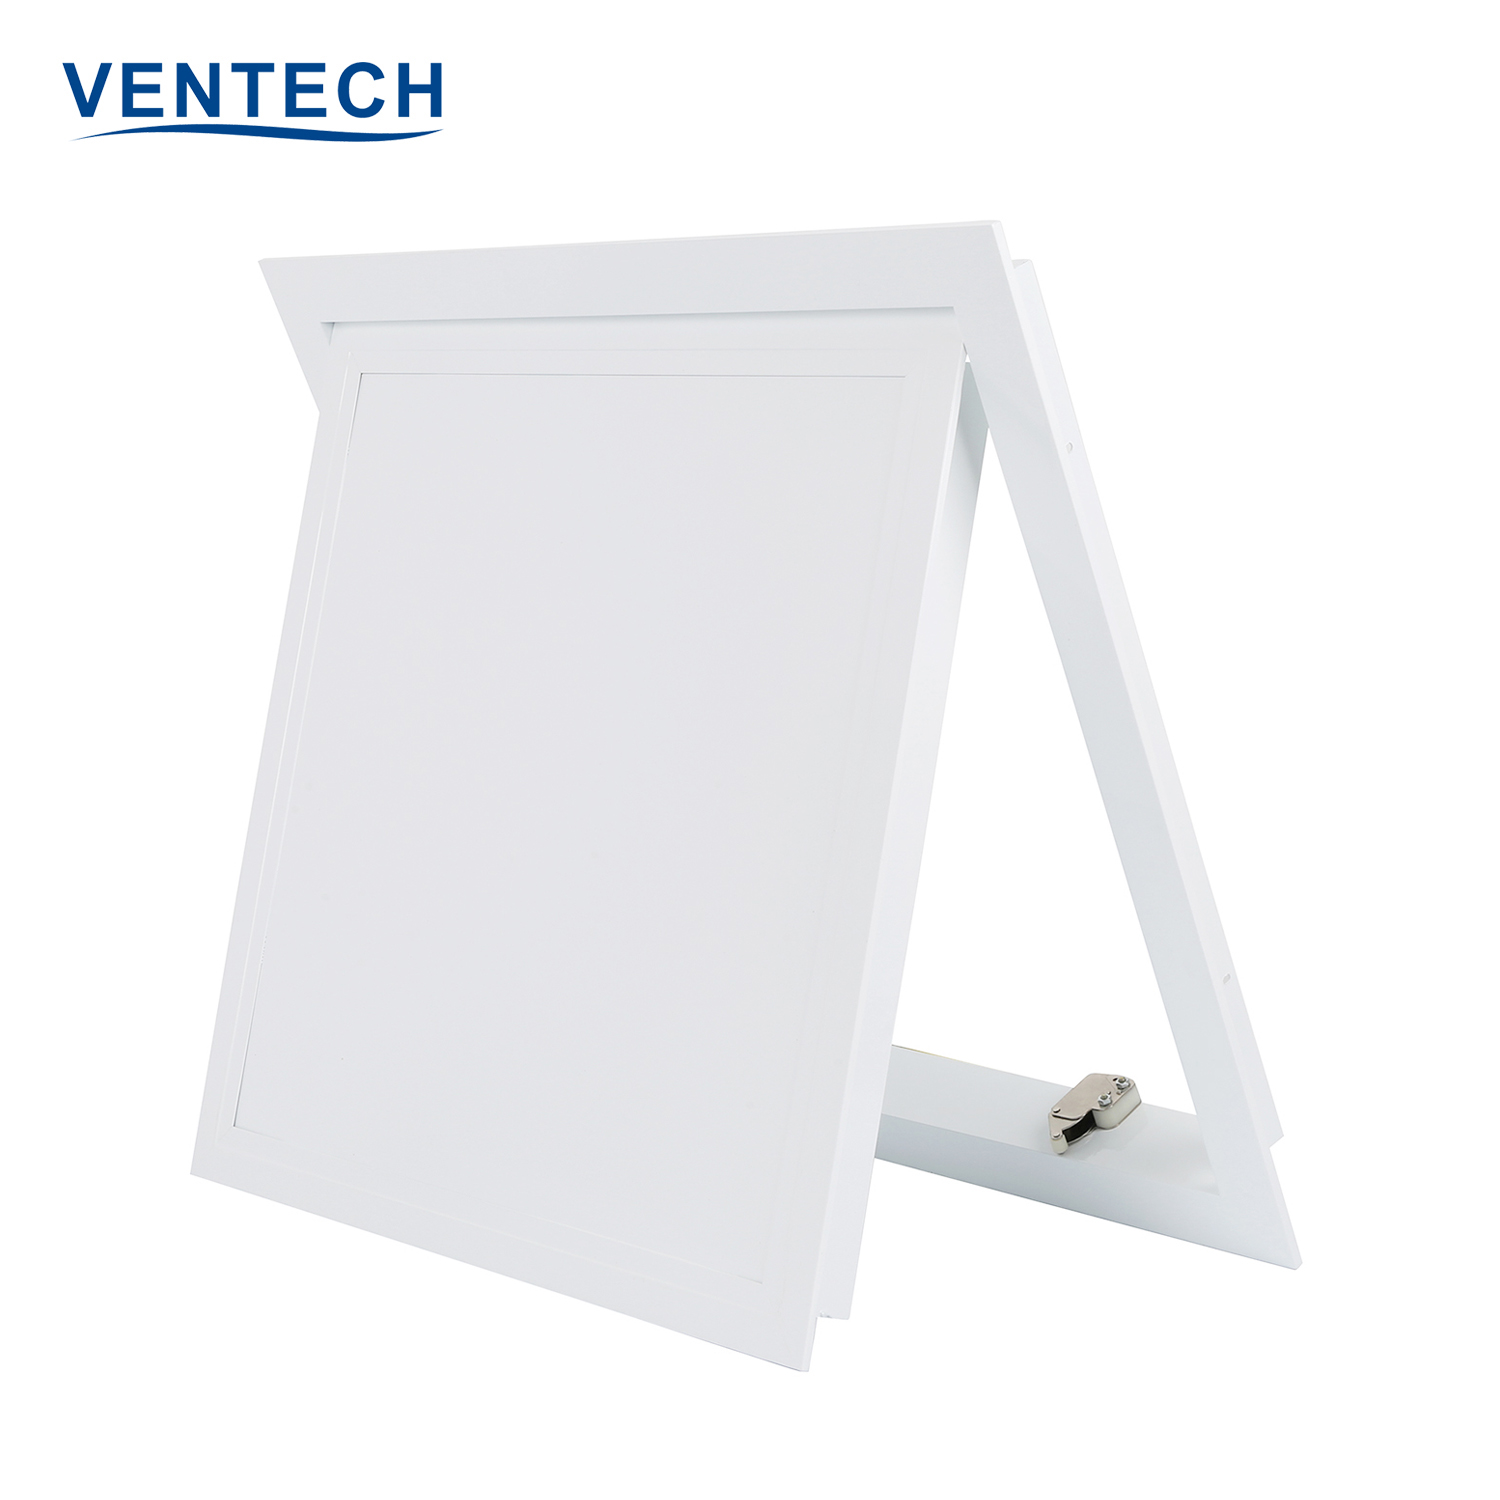 Ventech high-quality ceiling access panel factory direct supply for long corridors-2